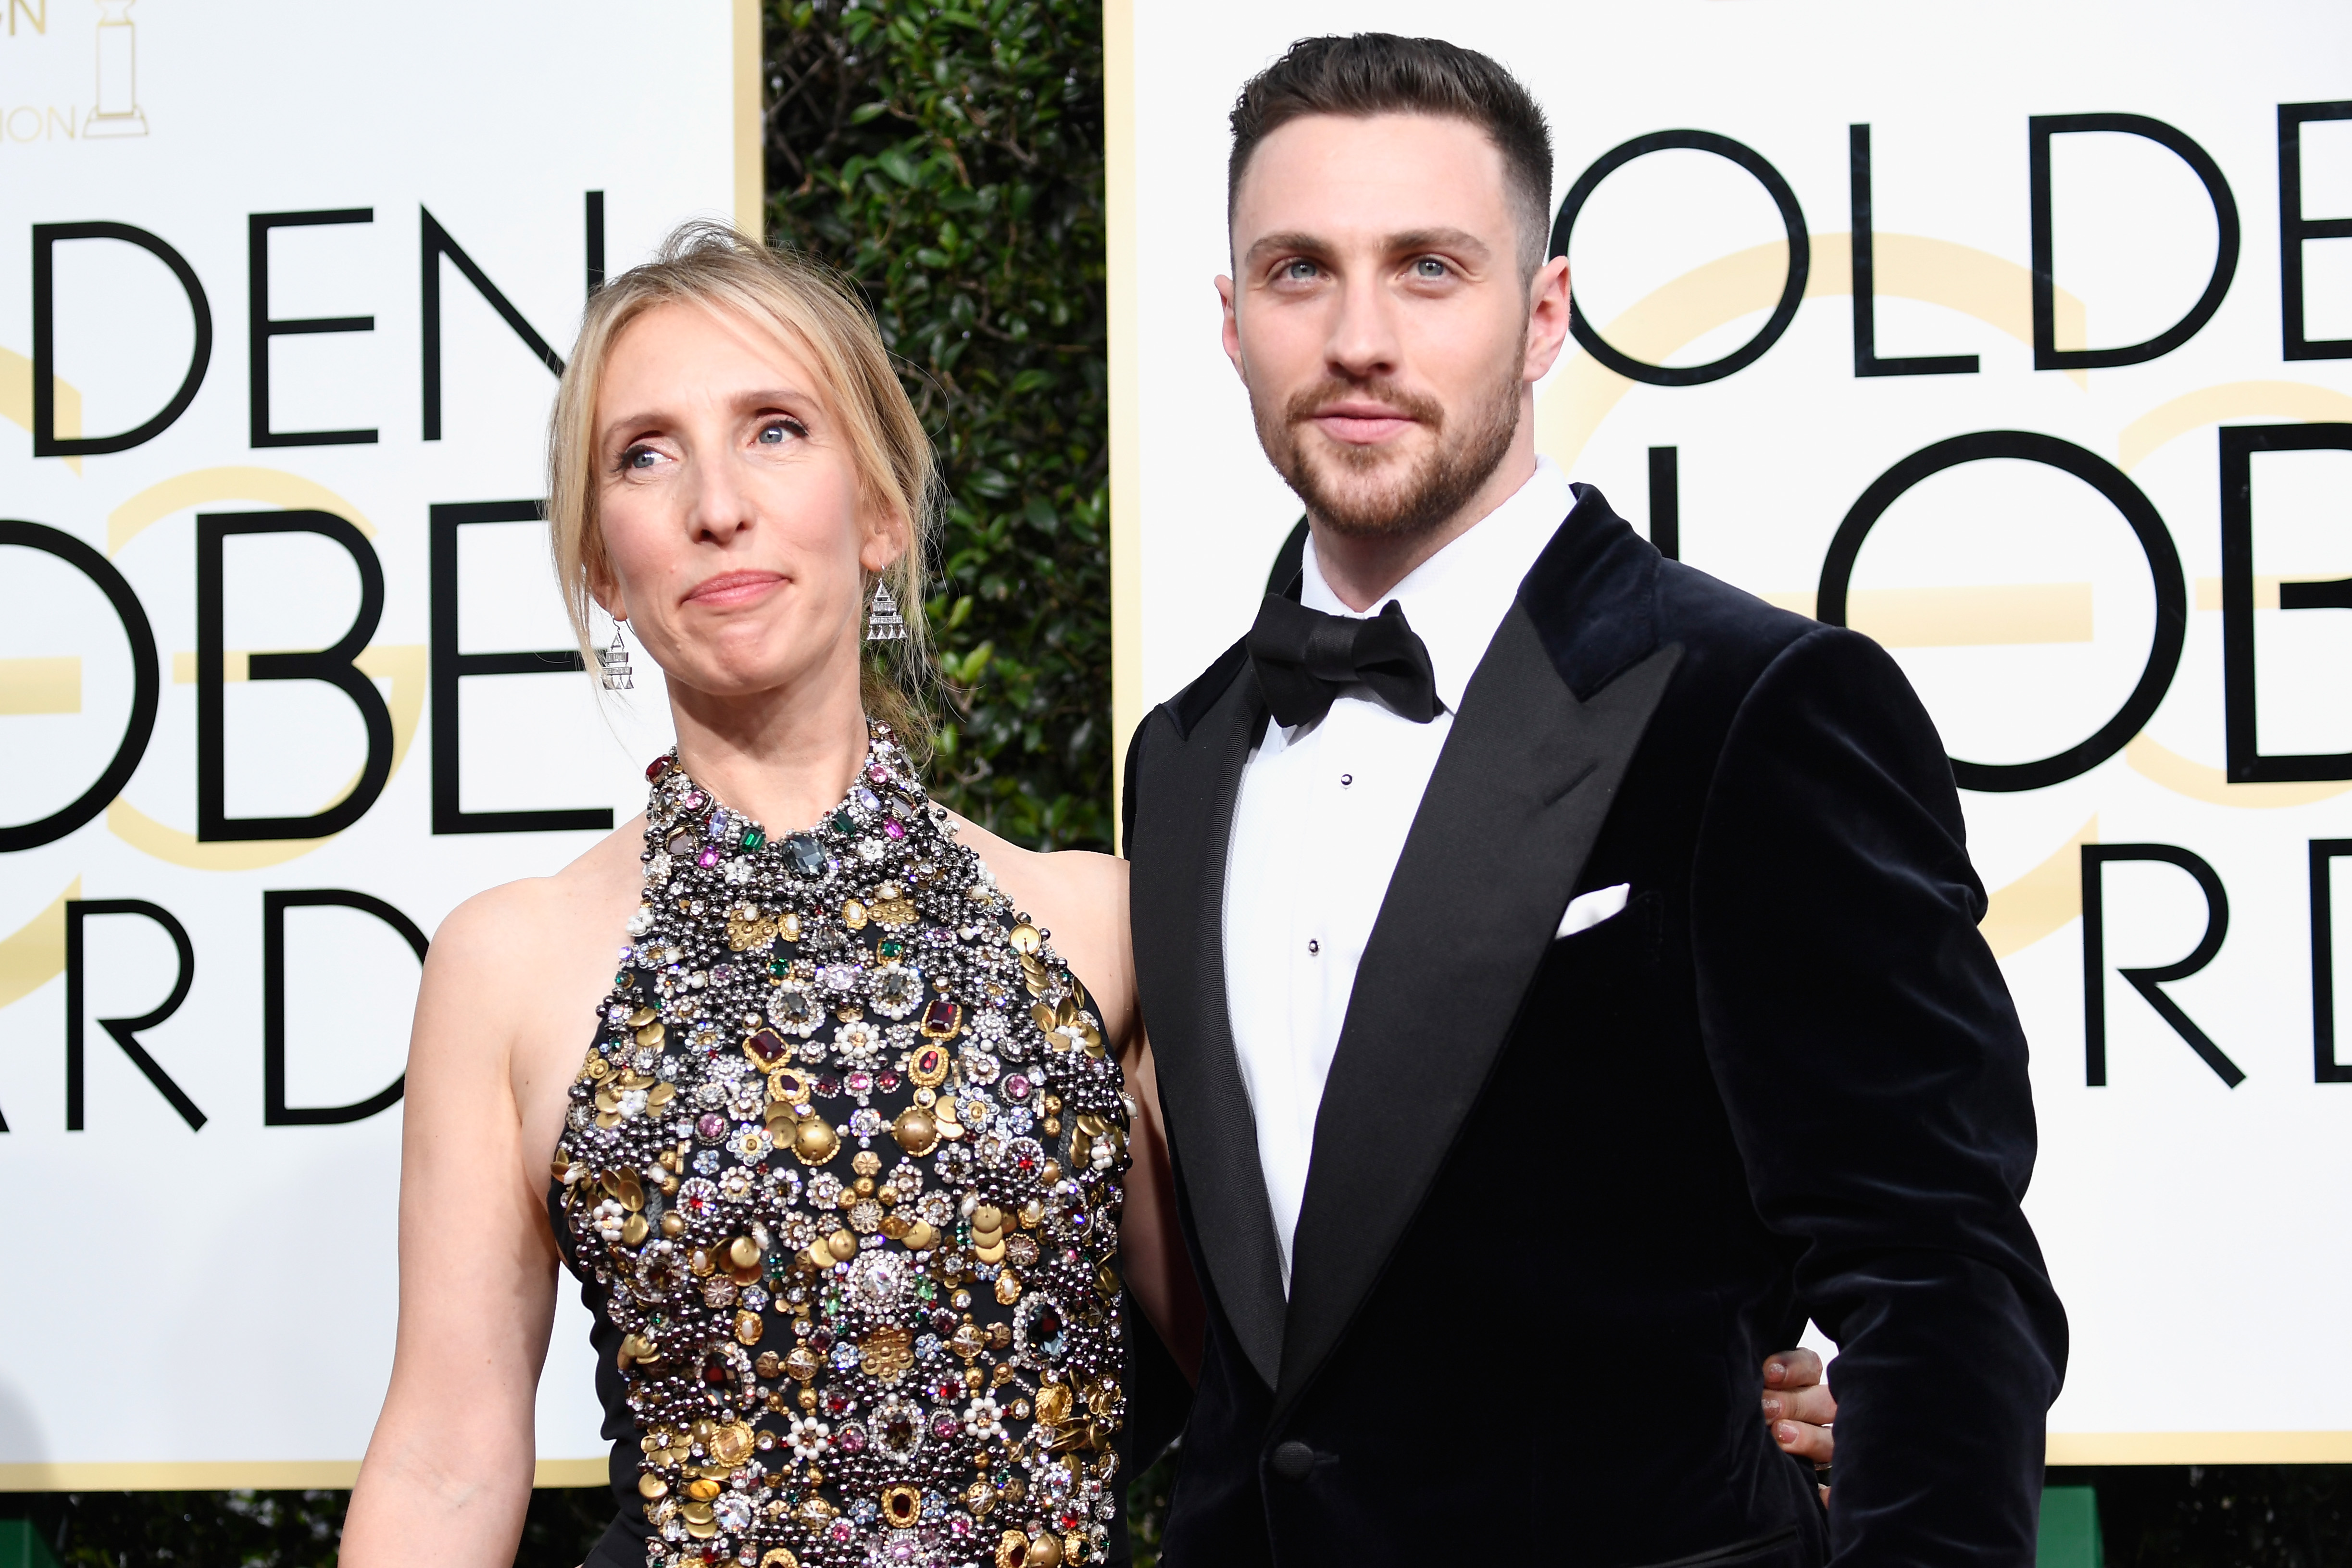 BEVERLY HILLS, CA - JANUARY 08: Director Sam Taylor-Johnson (L) and actor Aaron Taylor-Johnson attends the 74th Annual Golden Globe Awards at The Beverly Hilton Hotel on January 8, 2017 in Beverly Hills, California.   Frazer Harrison/Getty Images/AFP